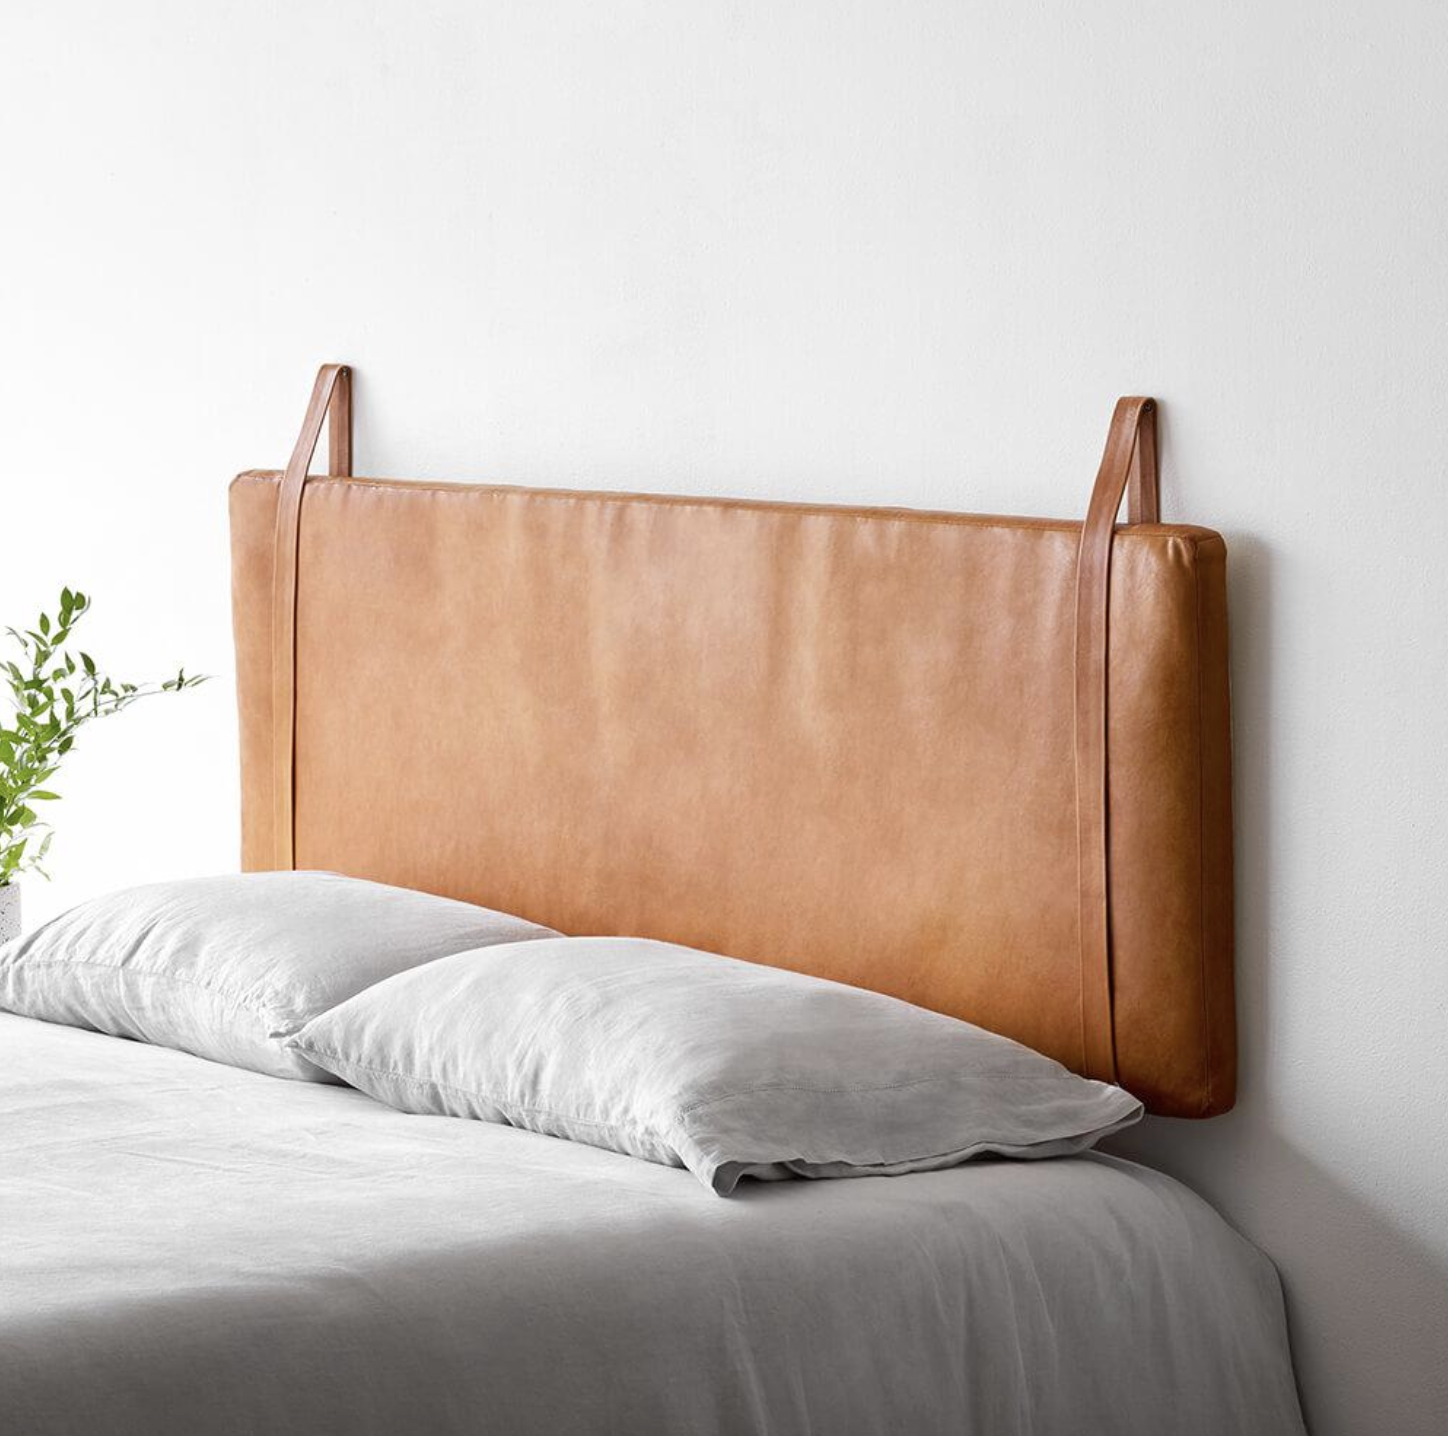 9 Wall Mounted Floating Headboards We, Can You Attach A Headboard To The Wall